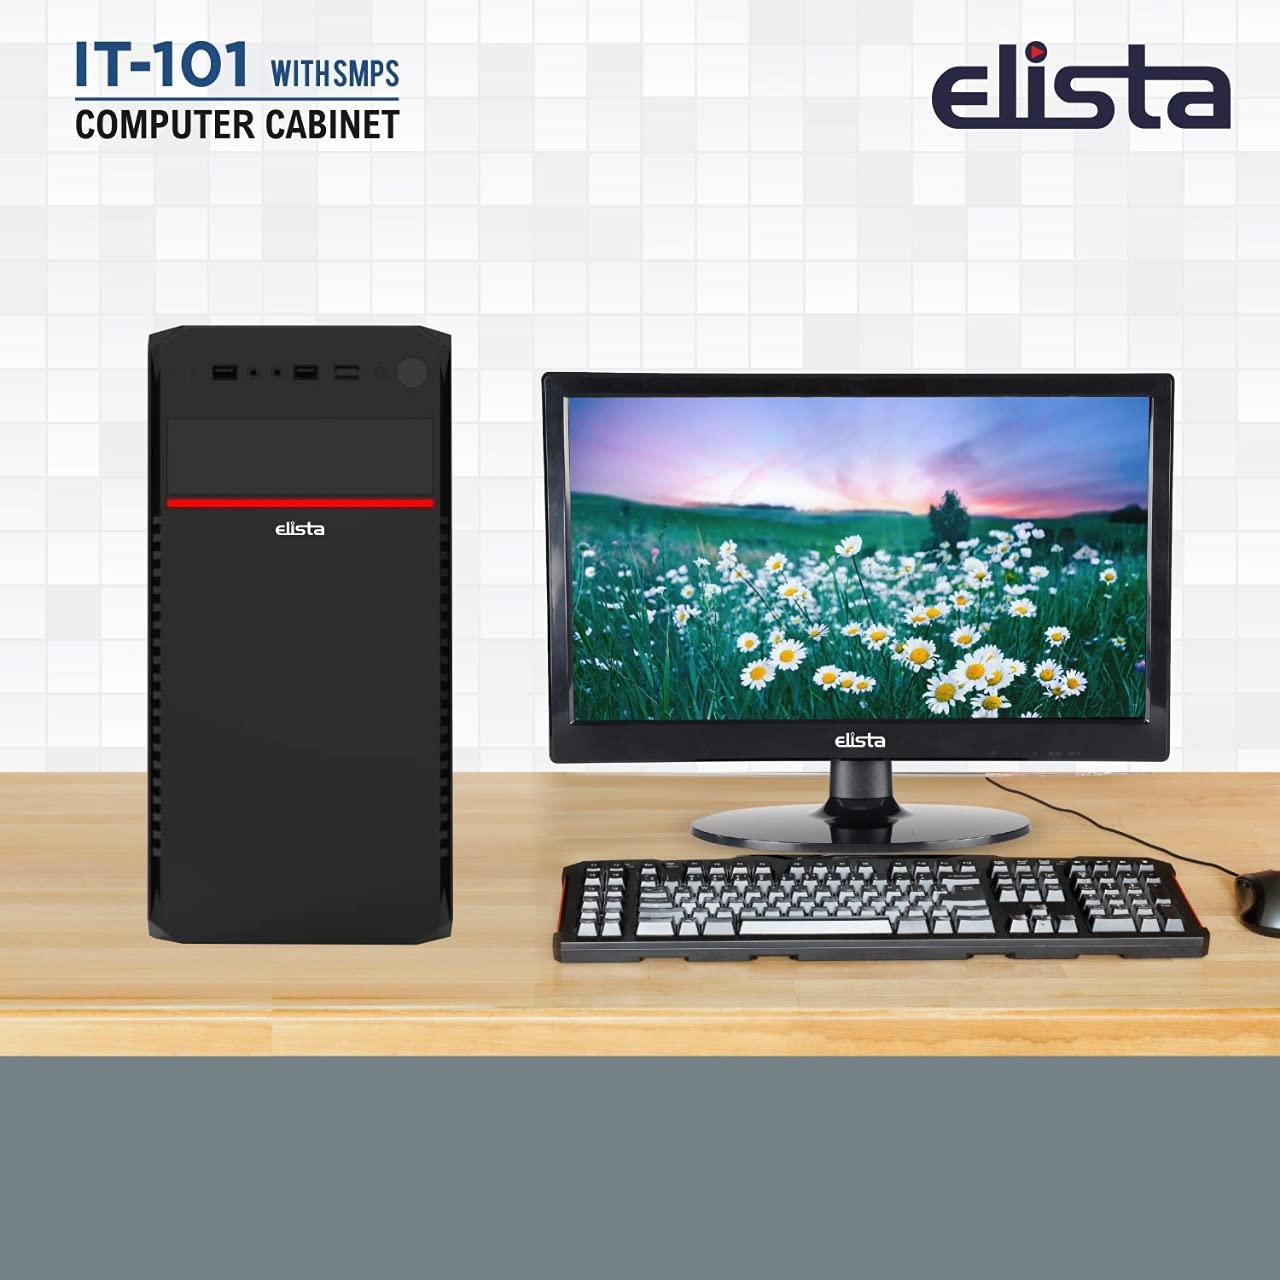 Elista Computer Cabinets with SMPS